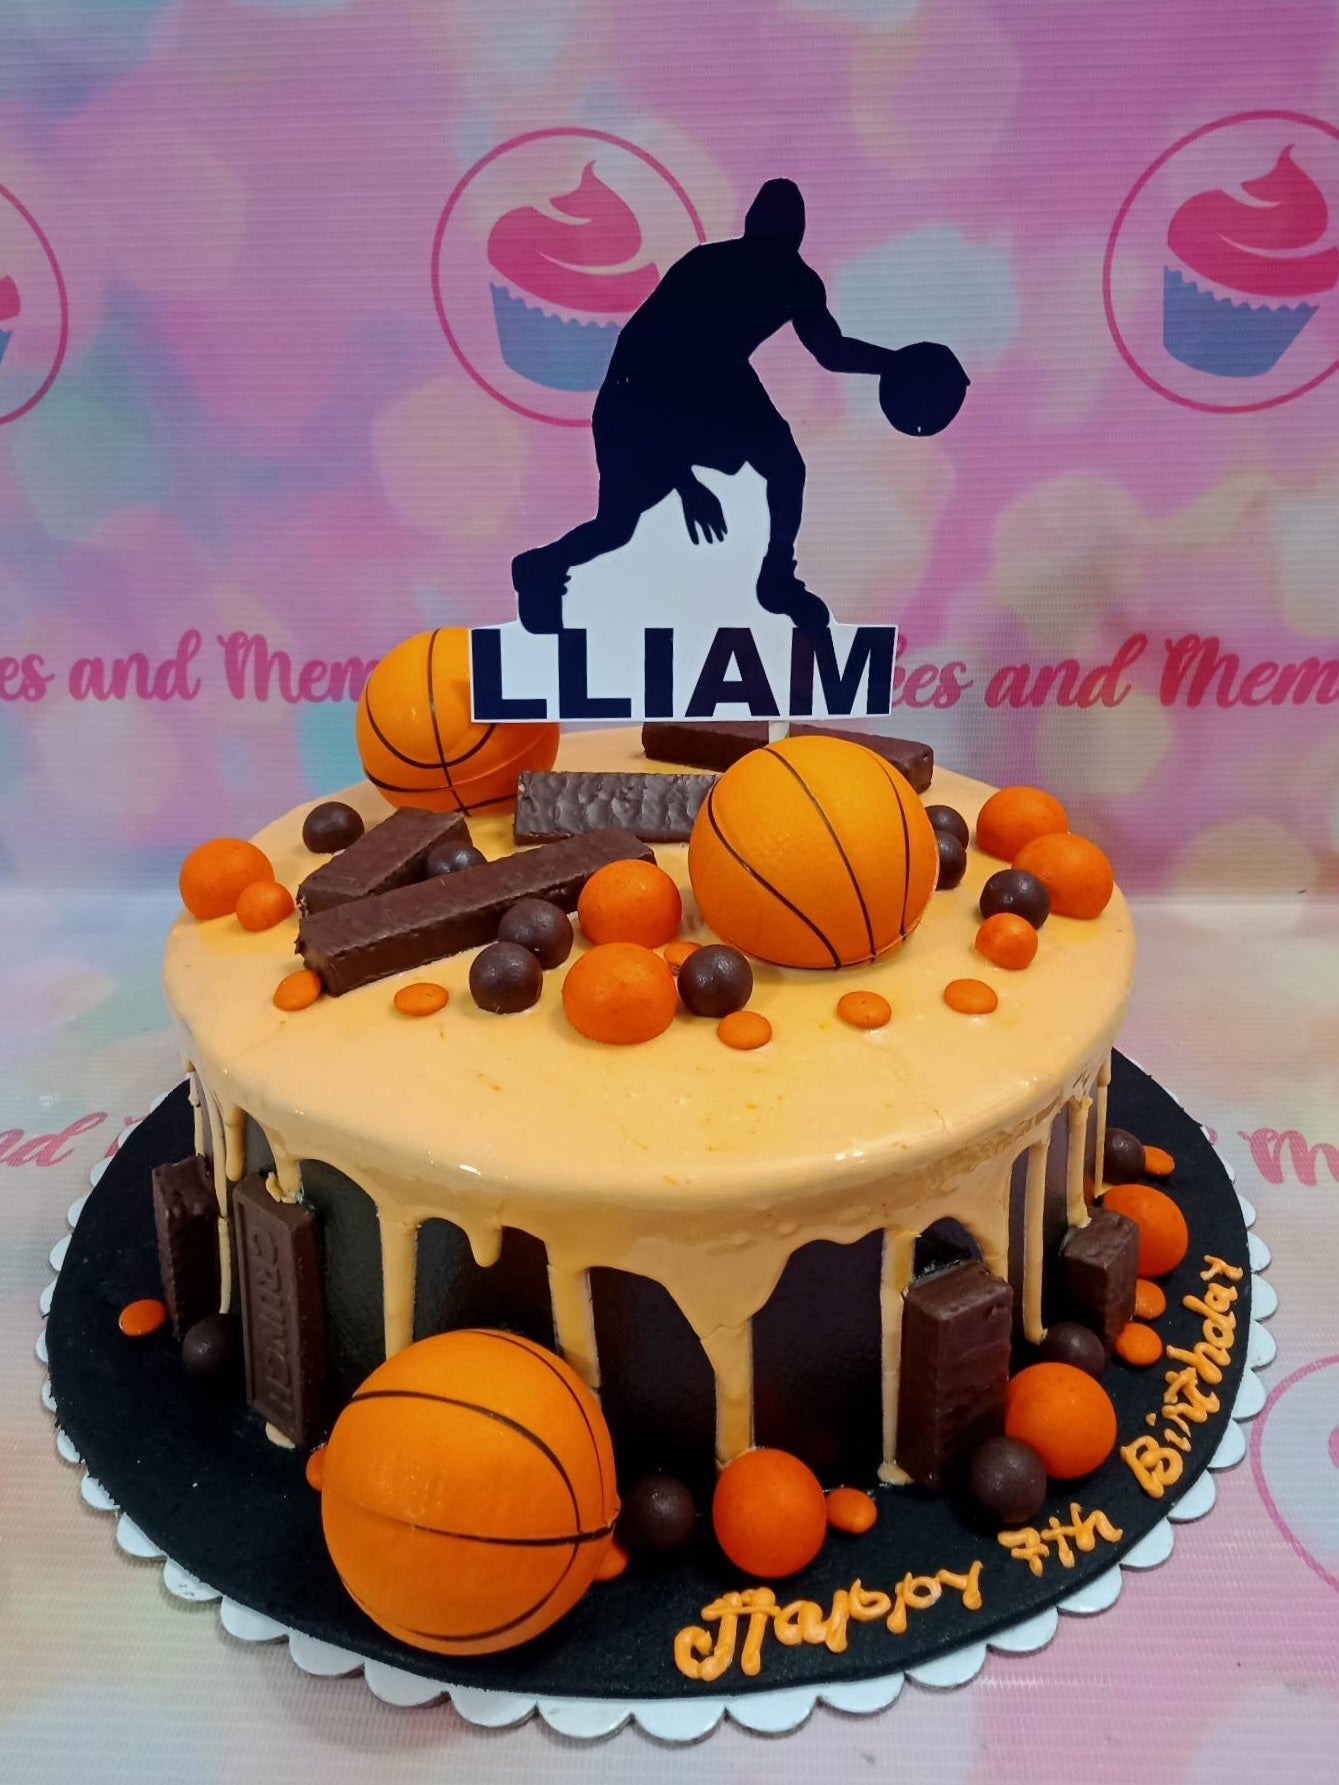 This custom decorated NBA and PBA themed cake is the perfect gift for the sports fan. It features a basketball design, with bright orange drip, and brown accents. Perfect for celebrating birthdays, or special occasions, for men, boys, brothers and dads!